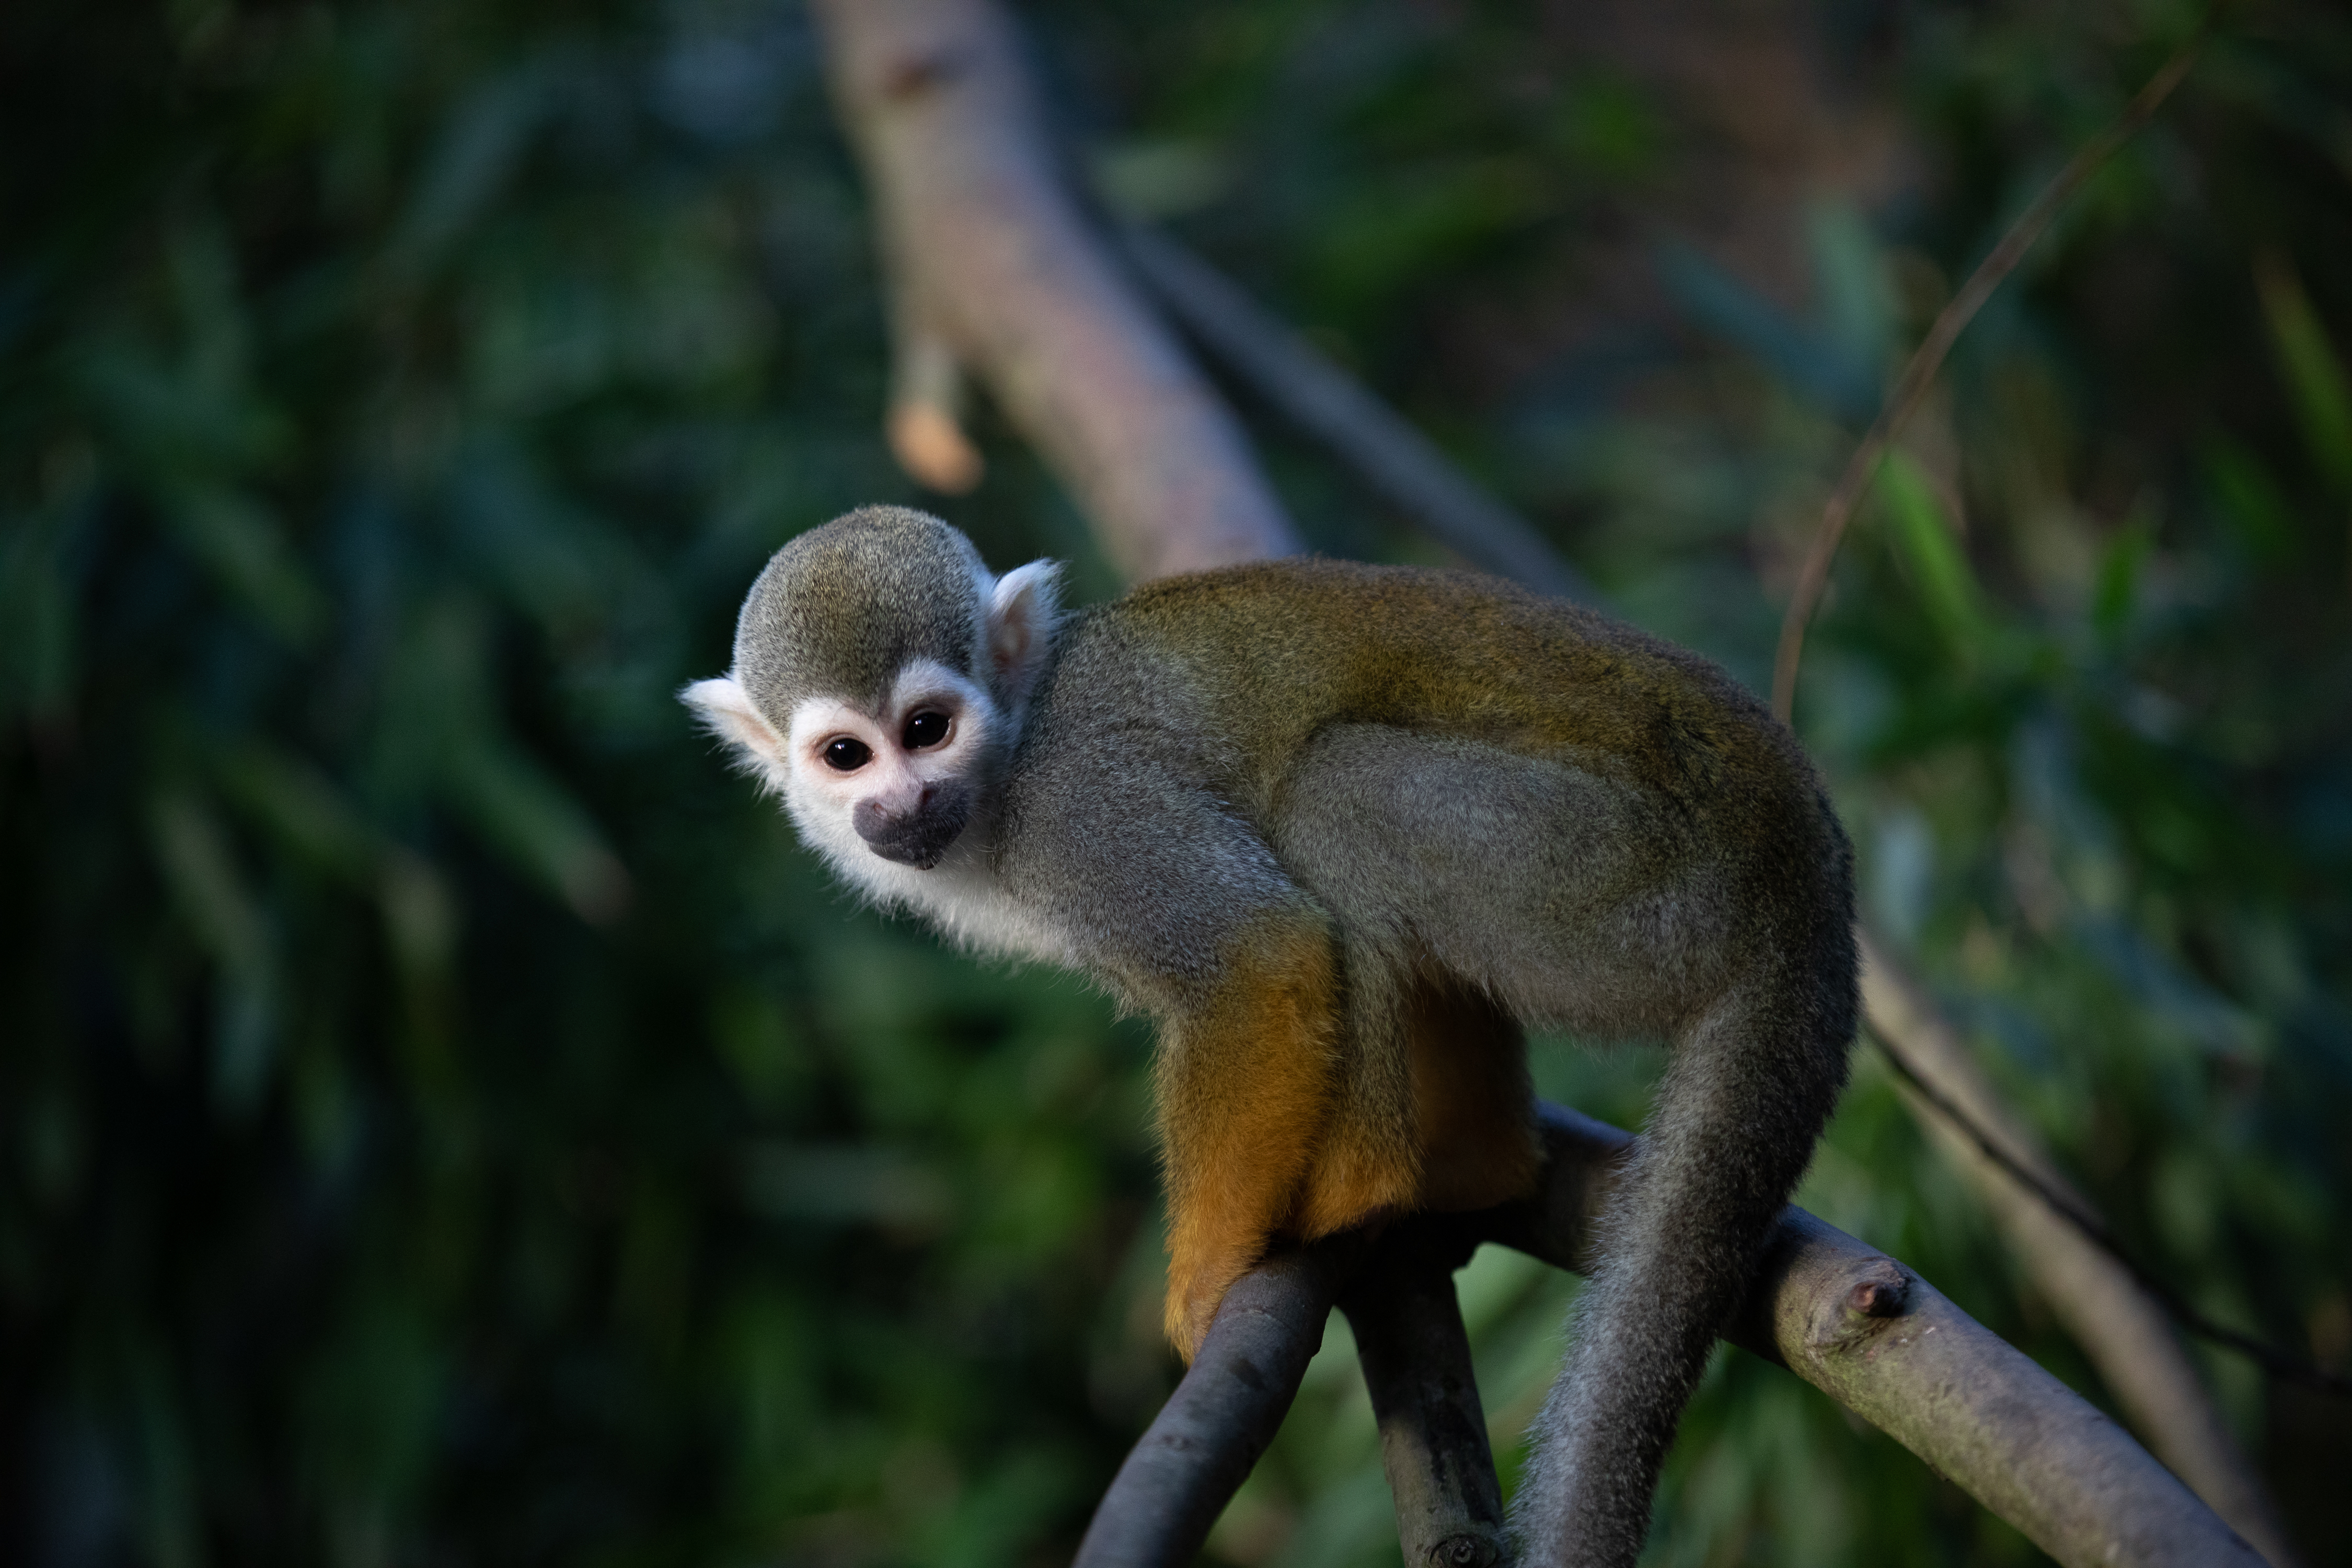 a squirrel monkey in a tree looking at the camera